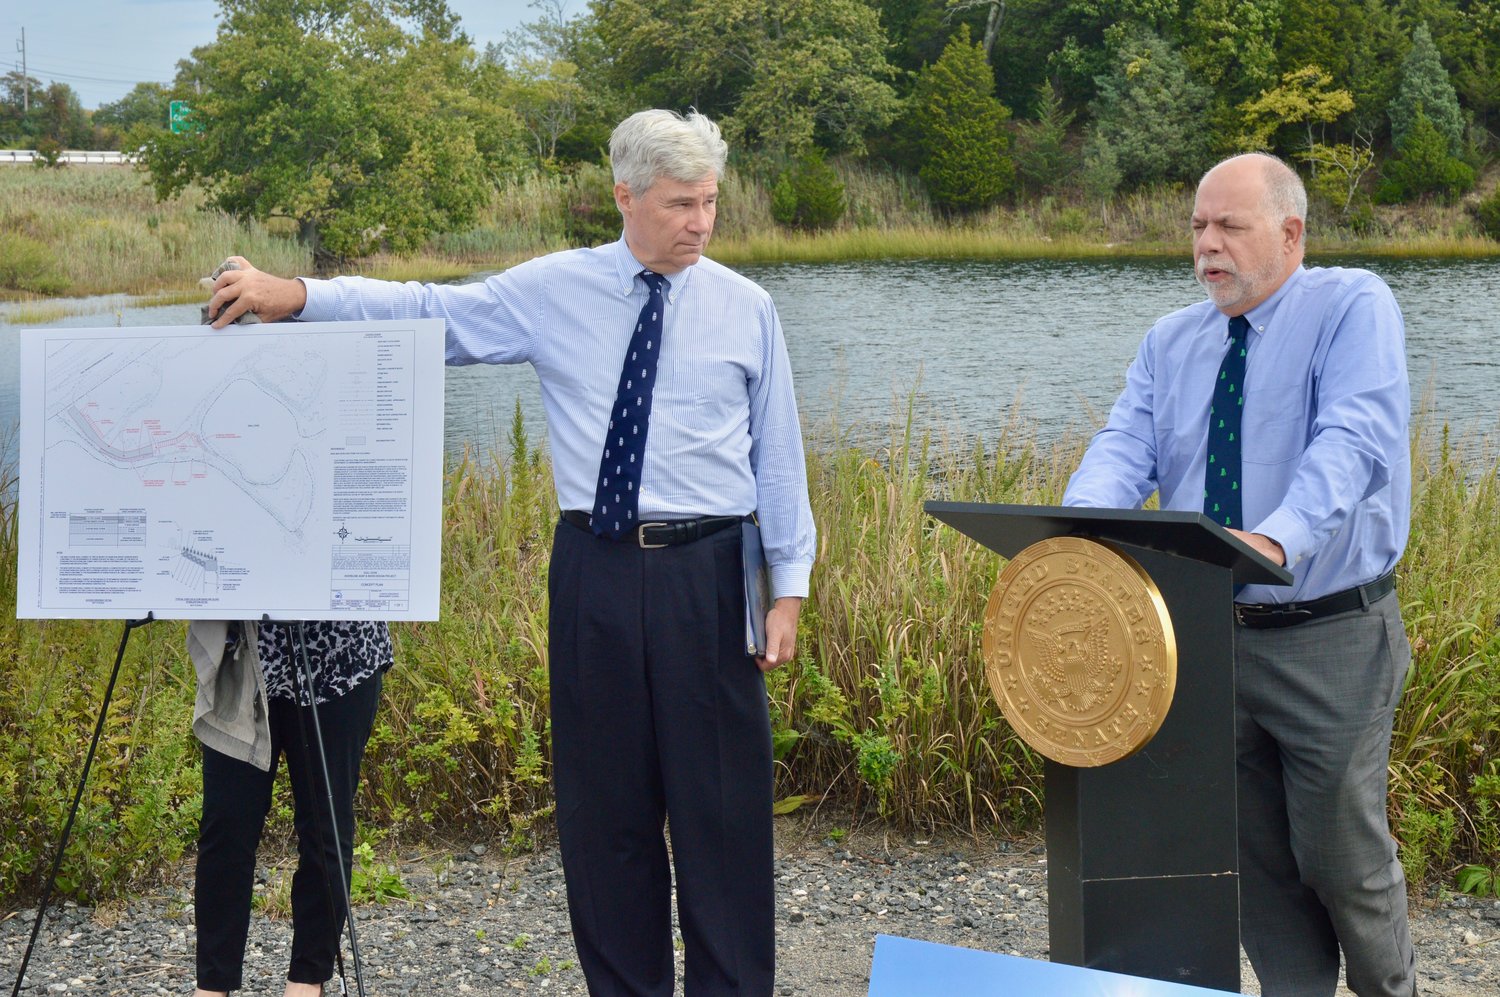 U.S. Sen. Sheldon Whitehouse holds a graphic showing the proposed project while RIDEM Director Terry Gray speaks.